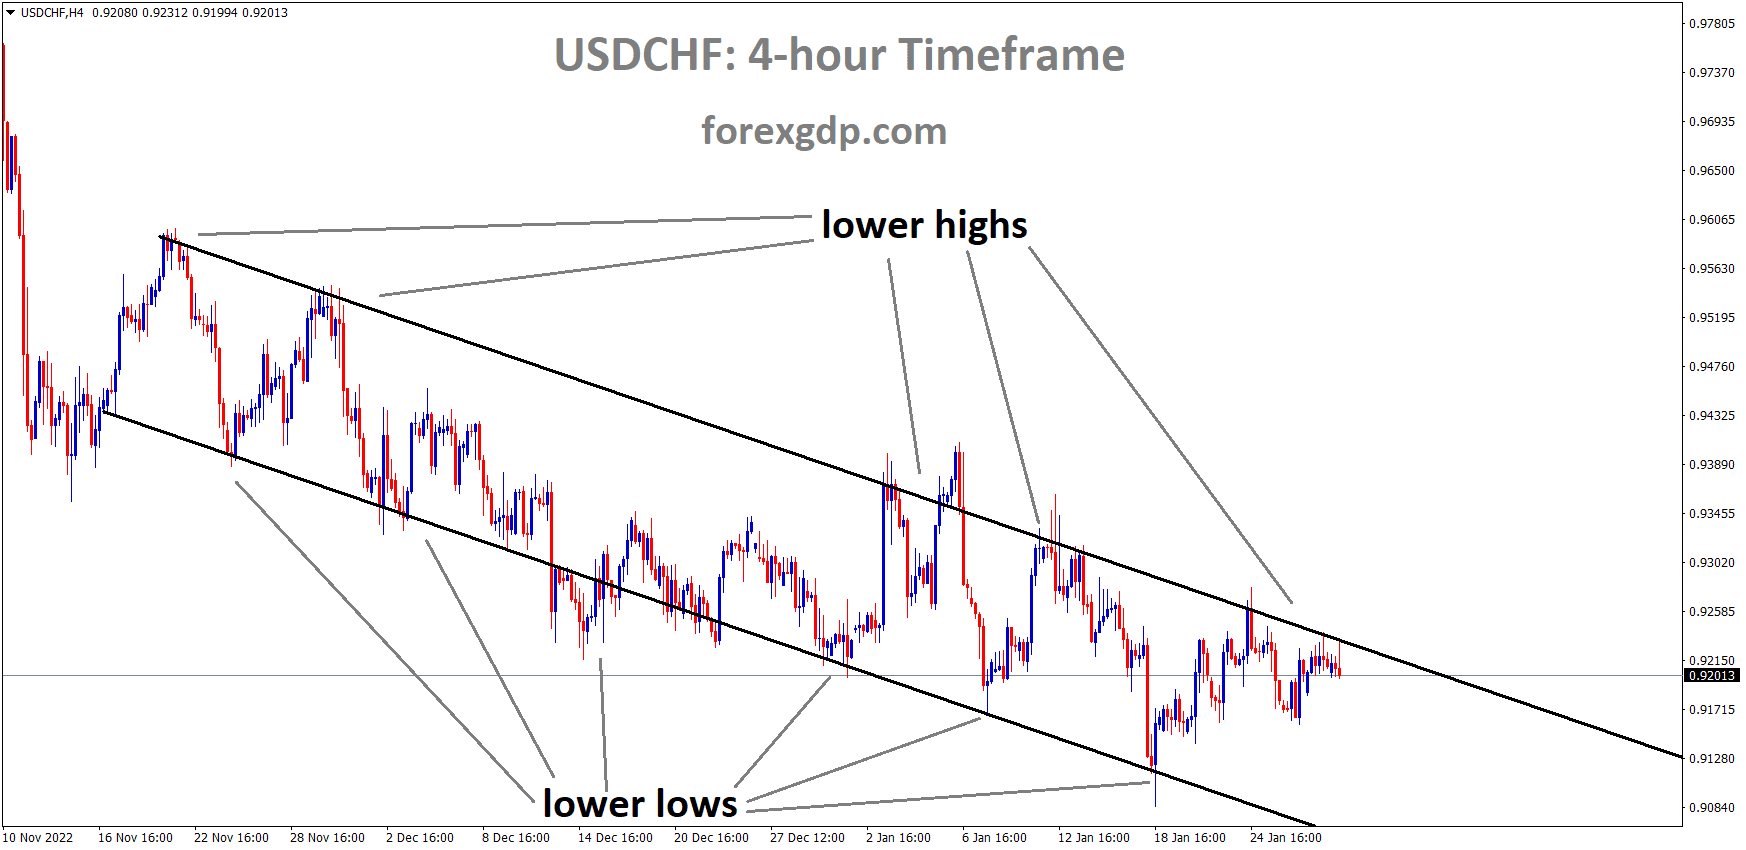 USDCHF is moving in the Descending channel and the market has fallen from the lower high area of the channel 4